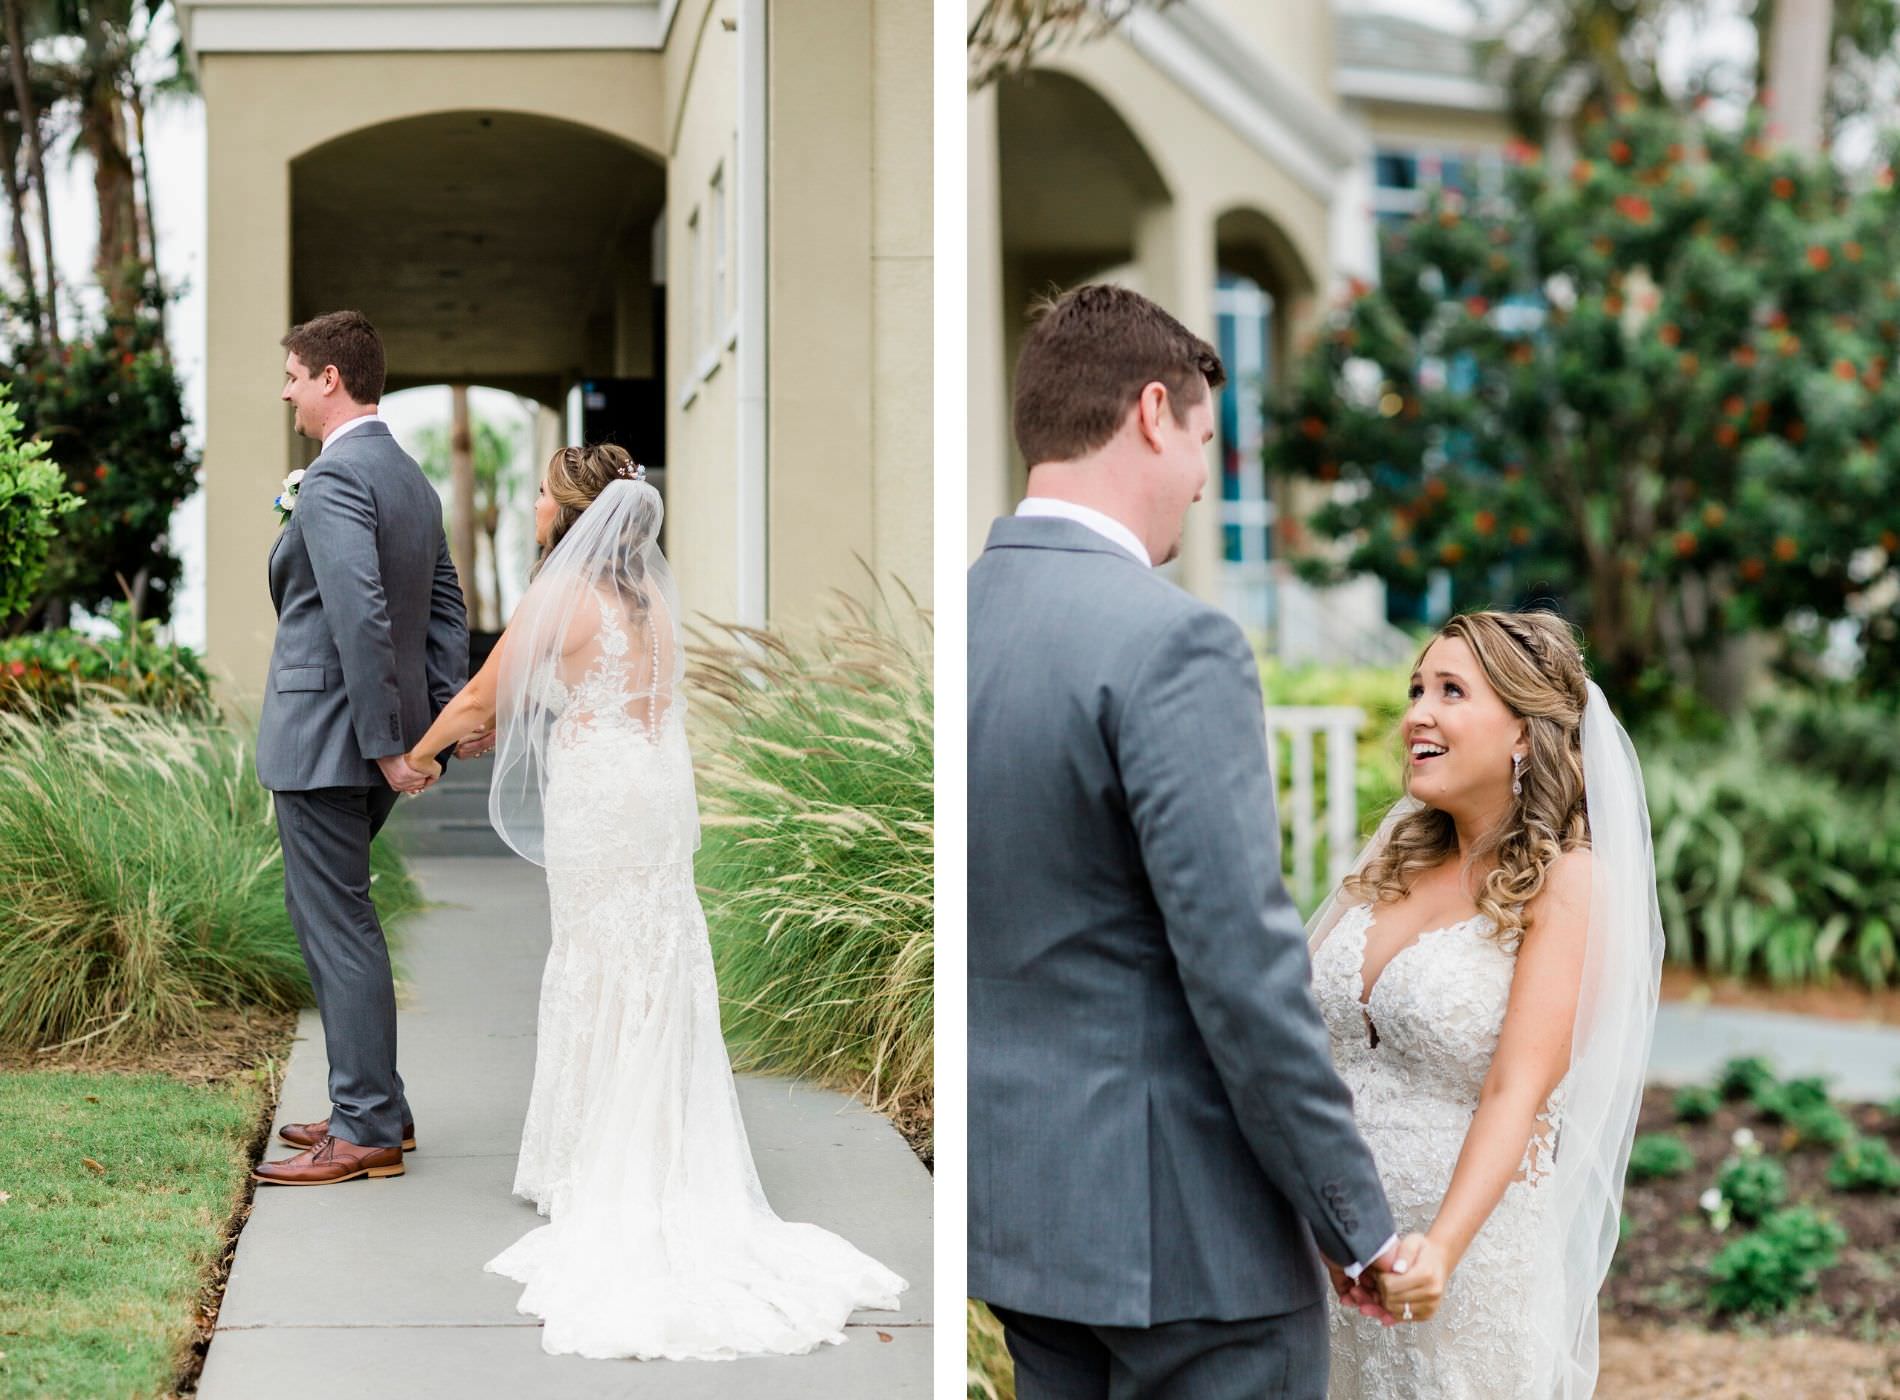 Bride and Groom First Look | St. Pete Wedding Venue Isla Del Sol | Lace Wedding Gown with Grey Groom Suit